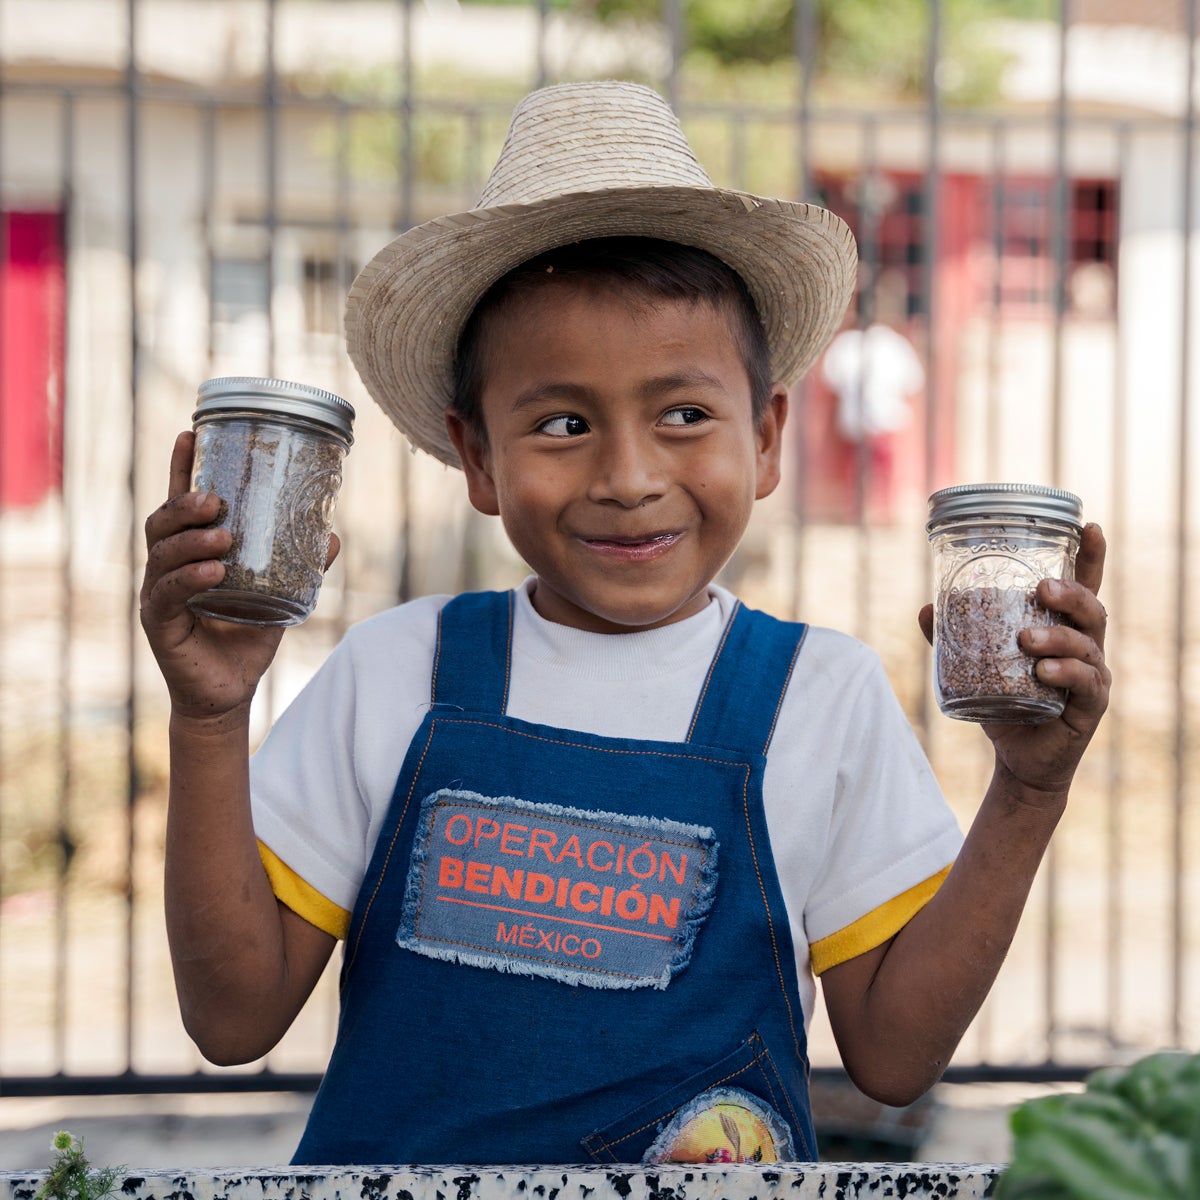 Carlos received safe water and hunger relief in Mexico.